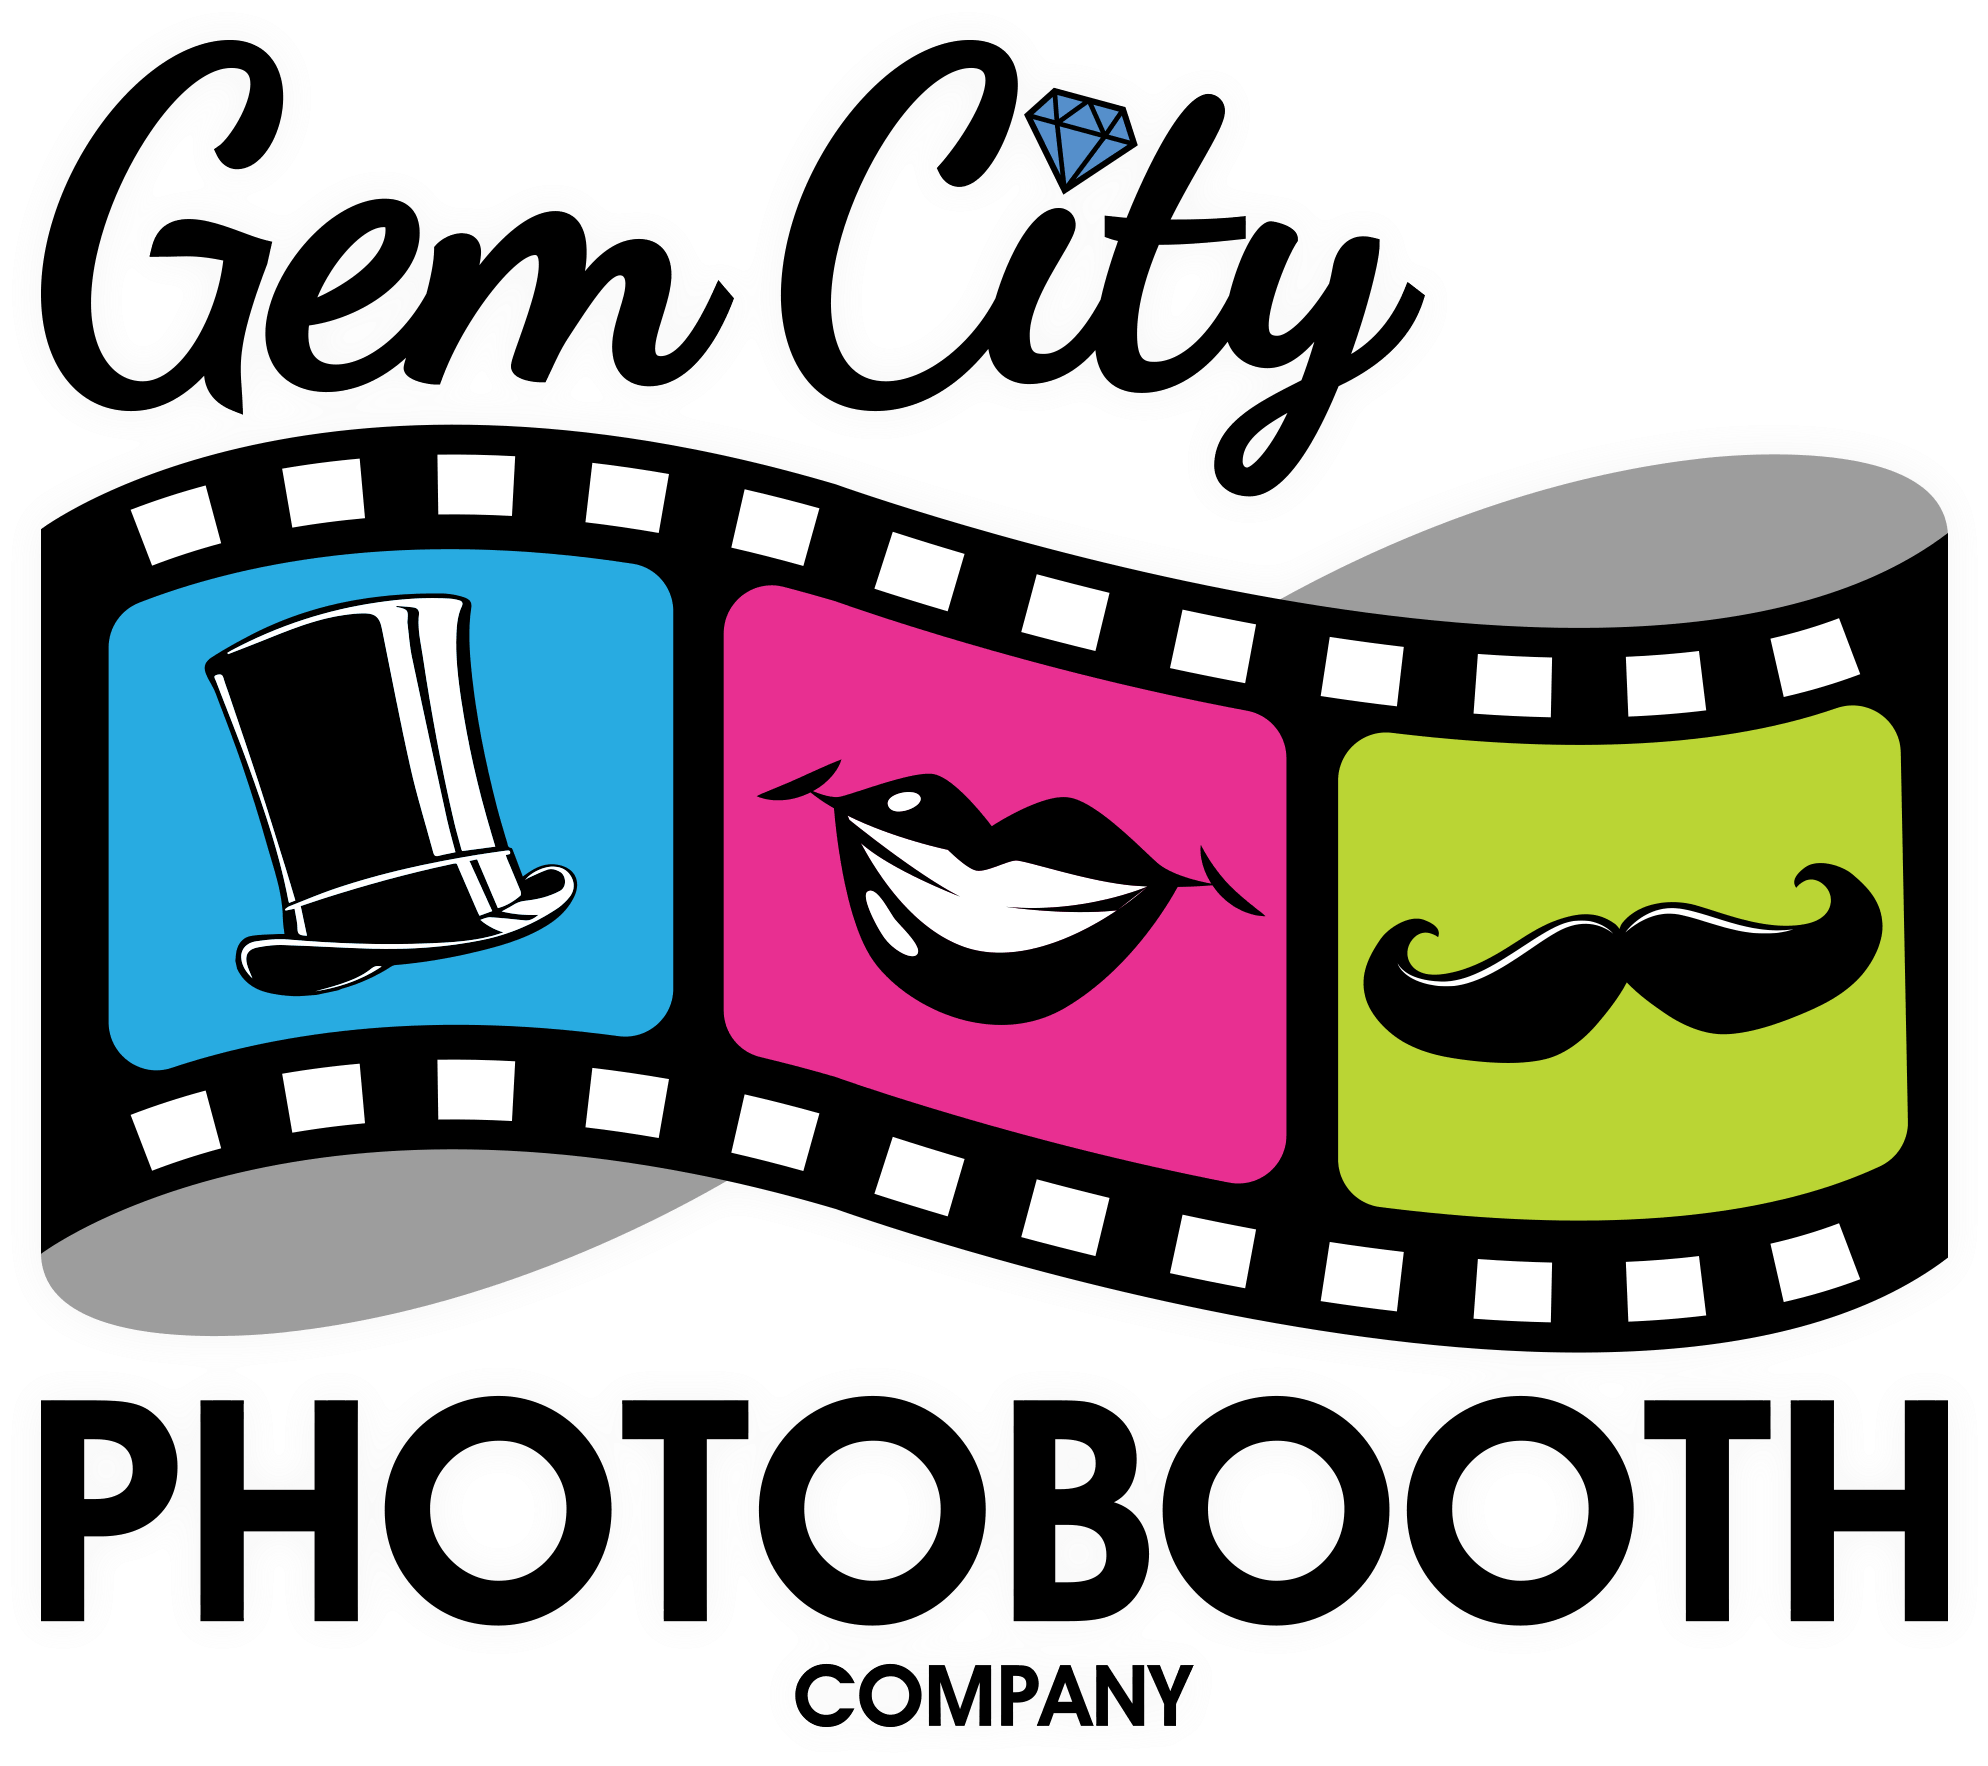 Detail Photo Booth Clip Art Nomer 25